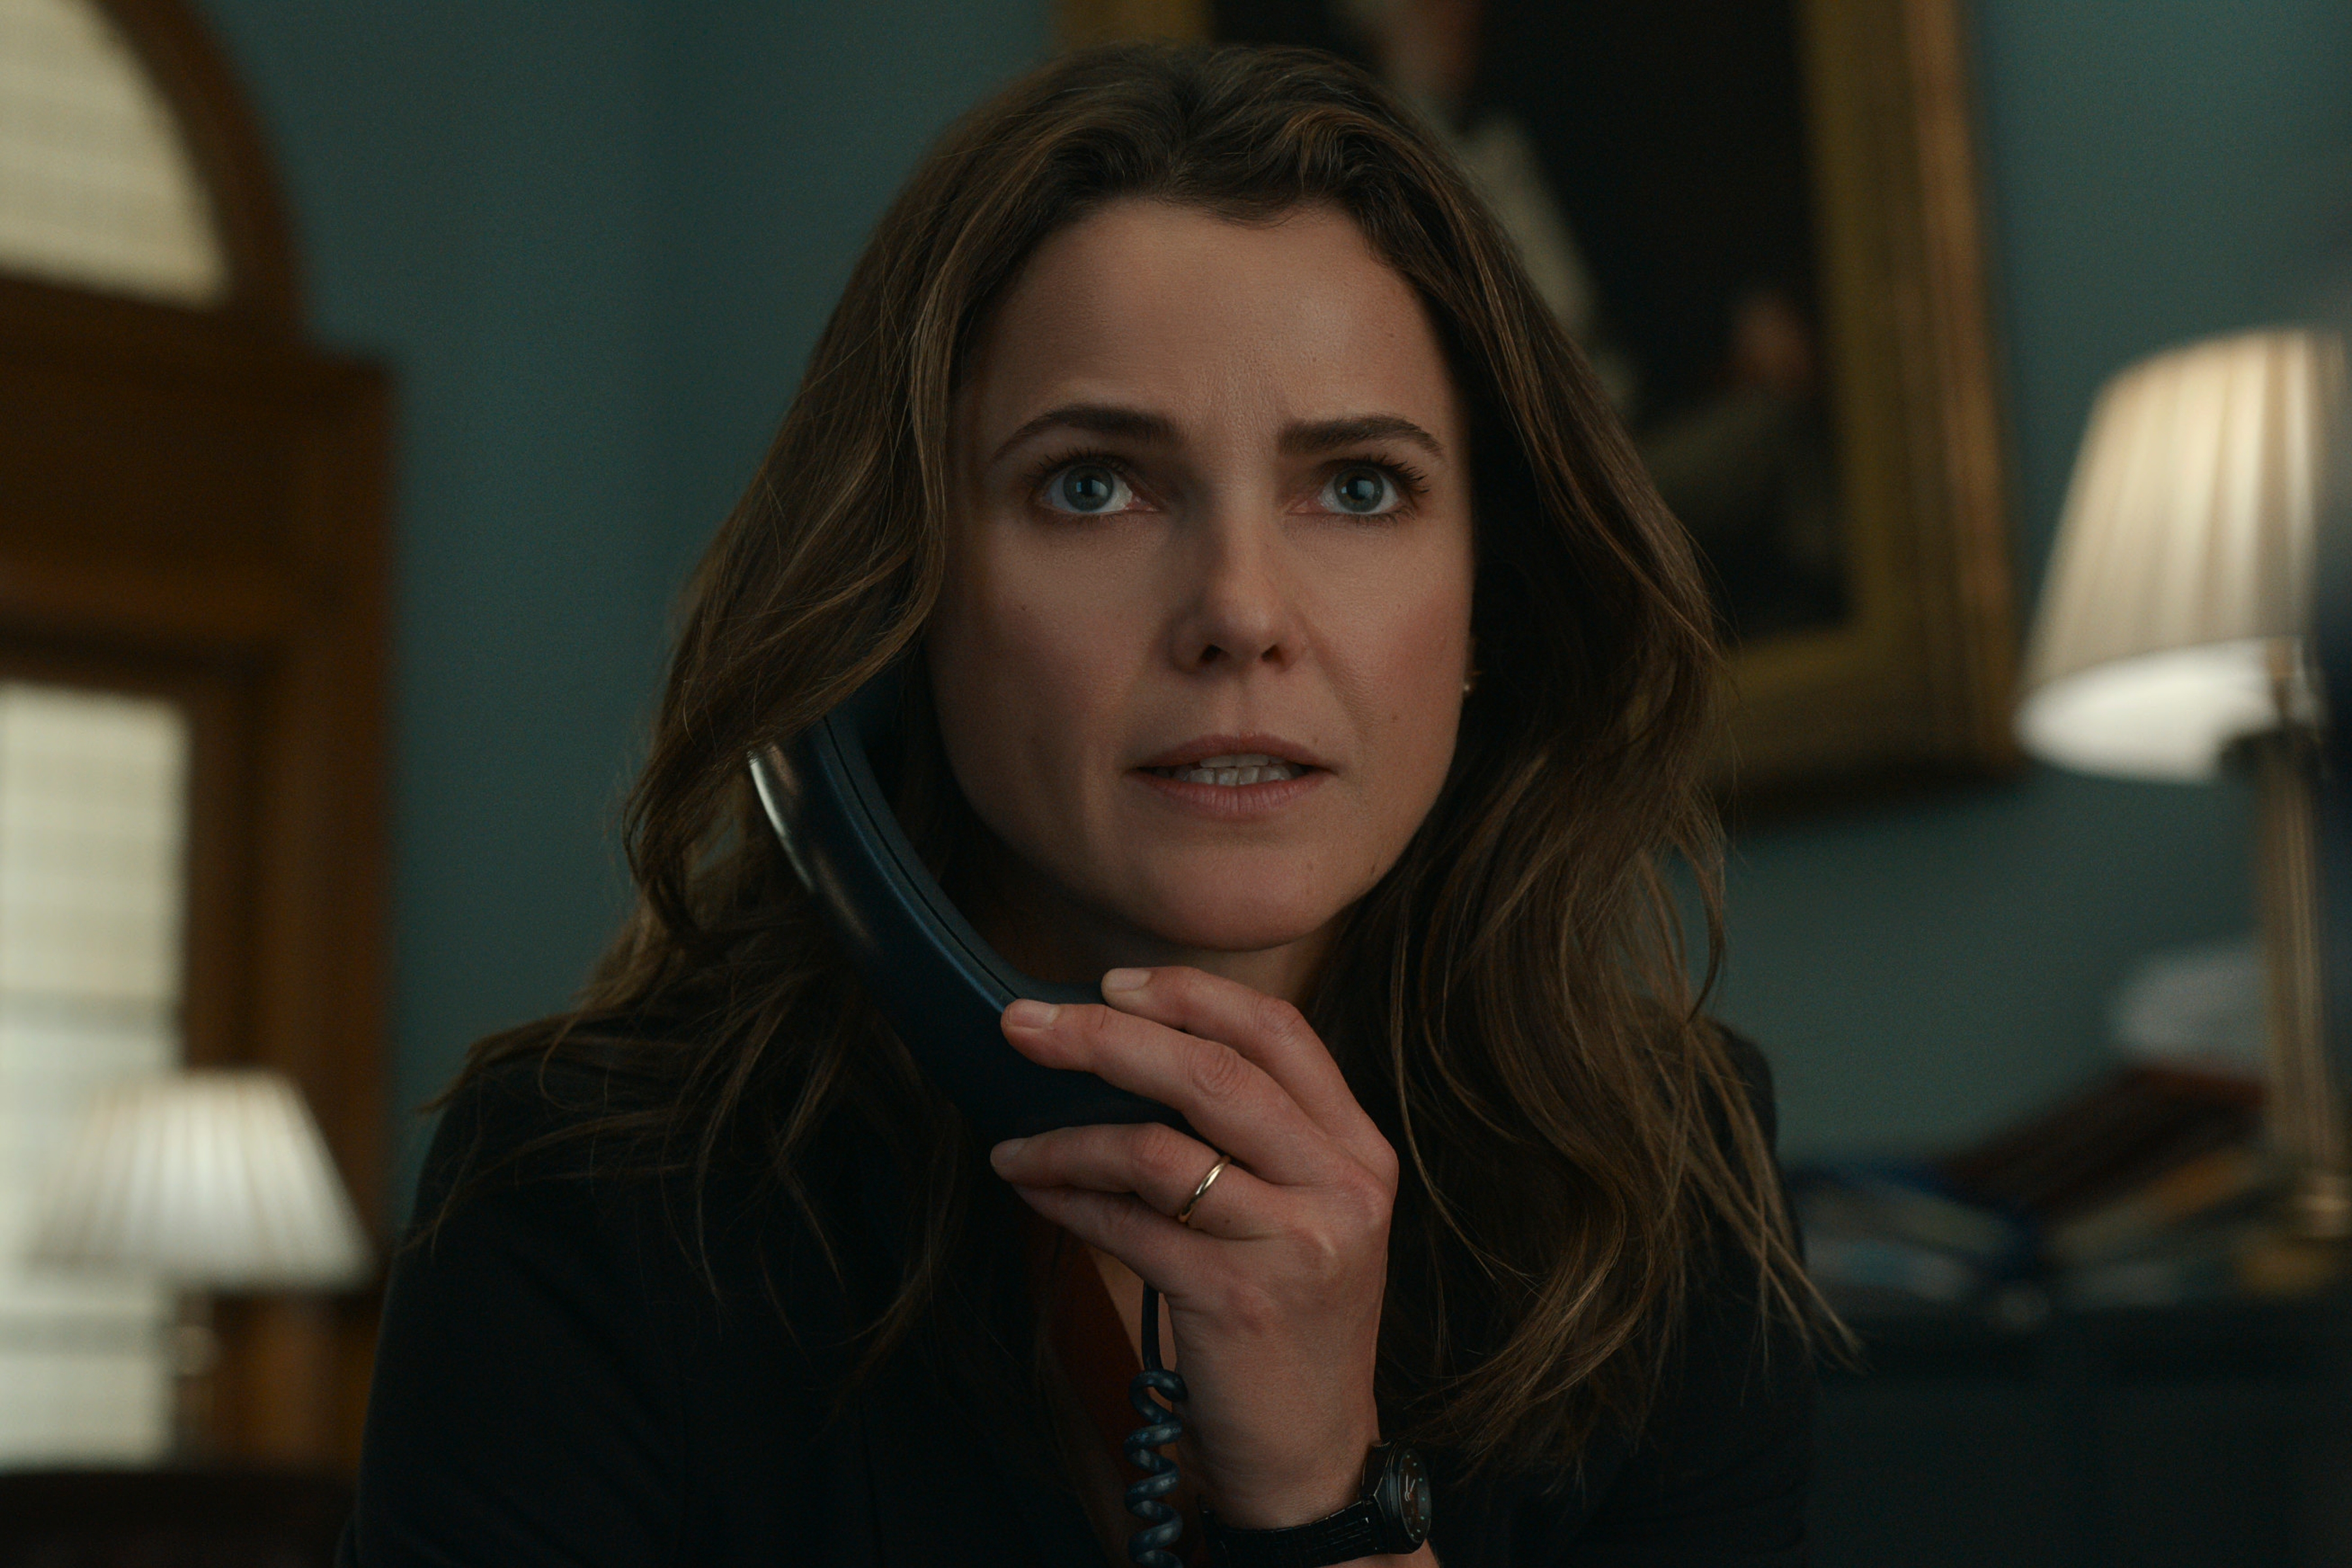 Keri Russell looks surprised while on the phone in The DIplomat